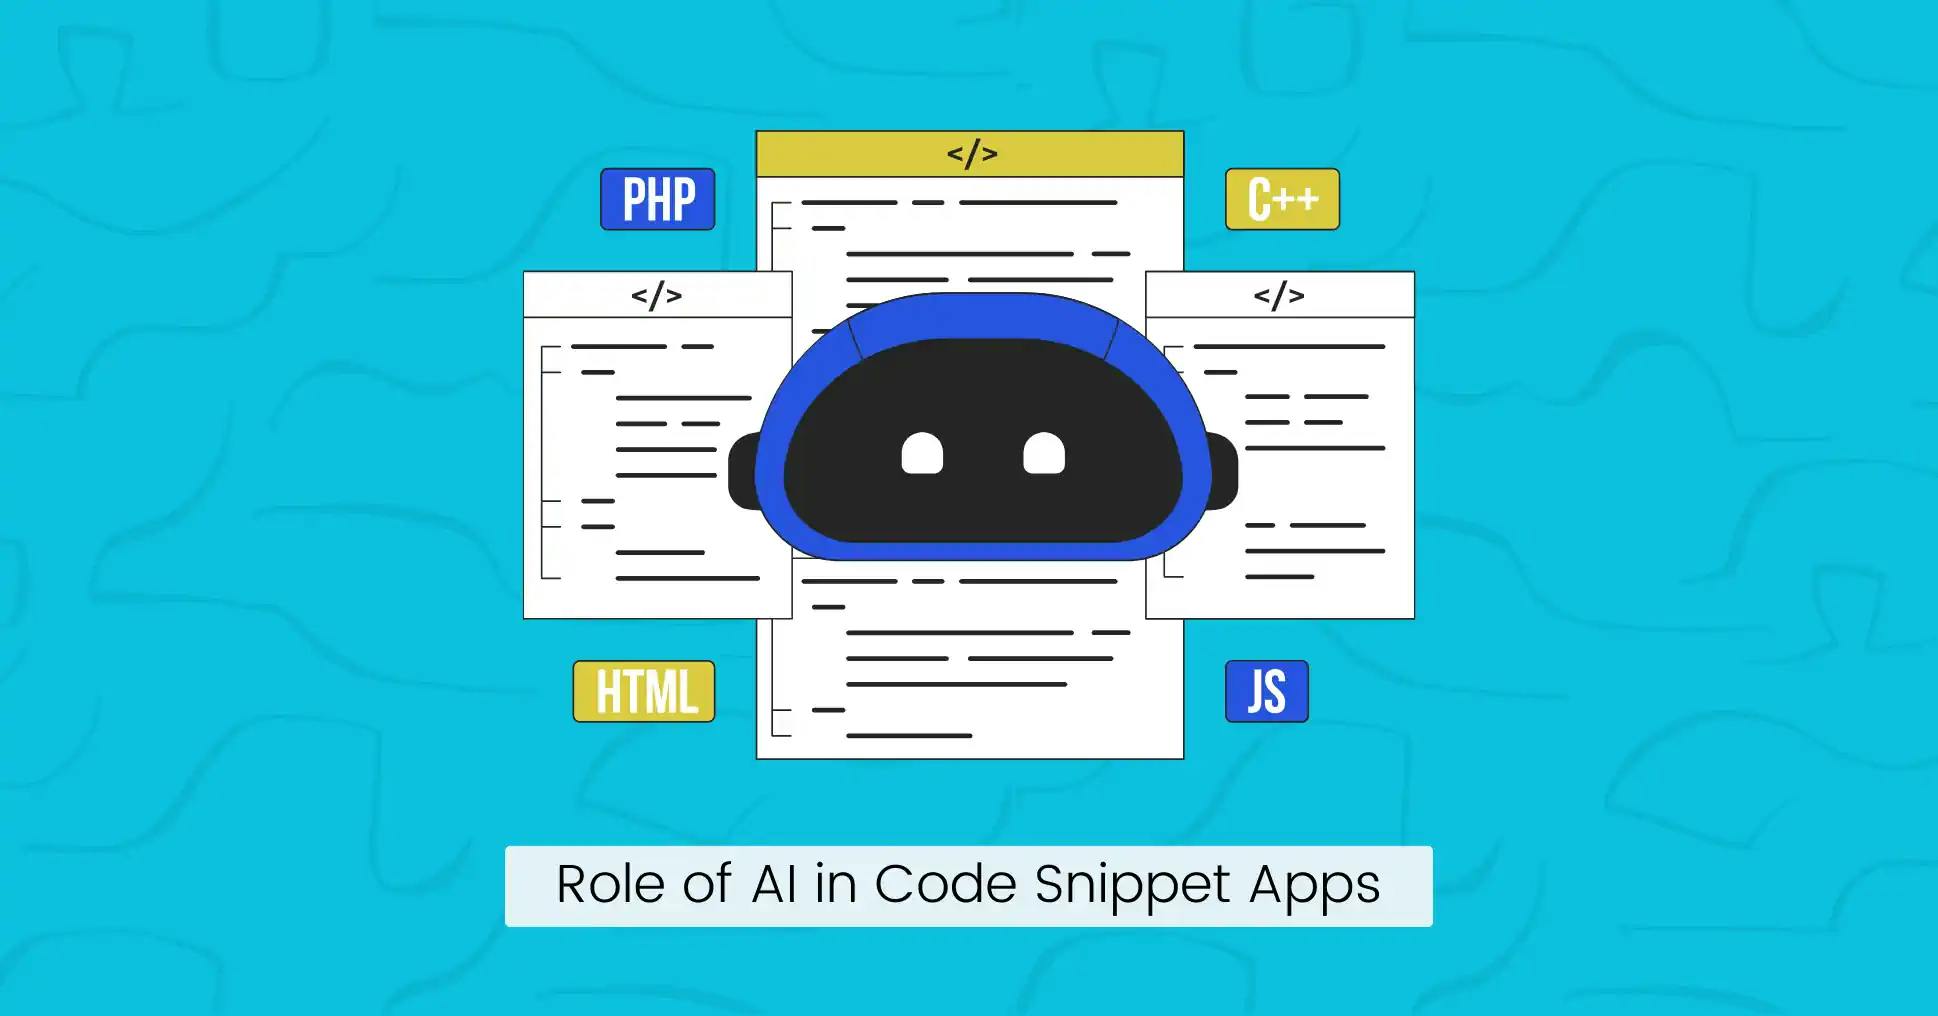 Role of Al in Code Snippet Apps